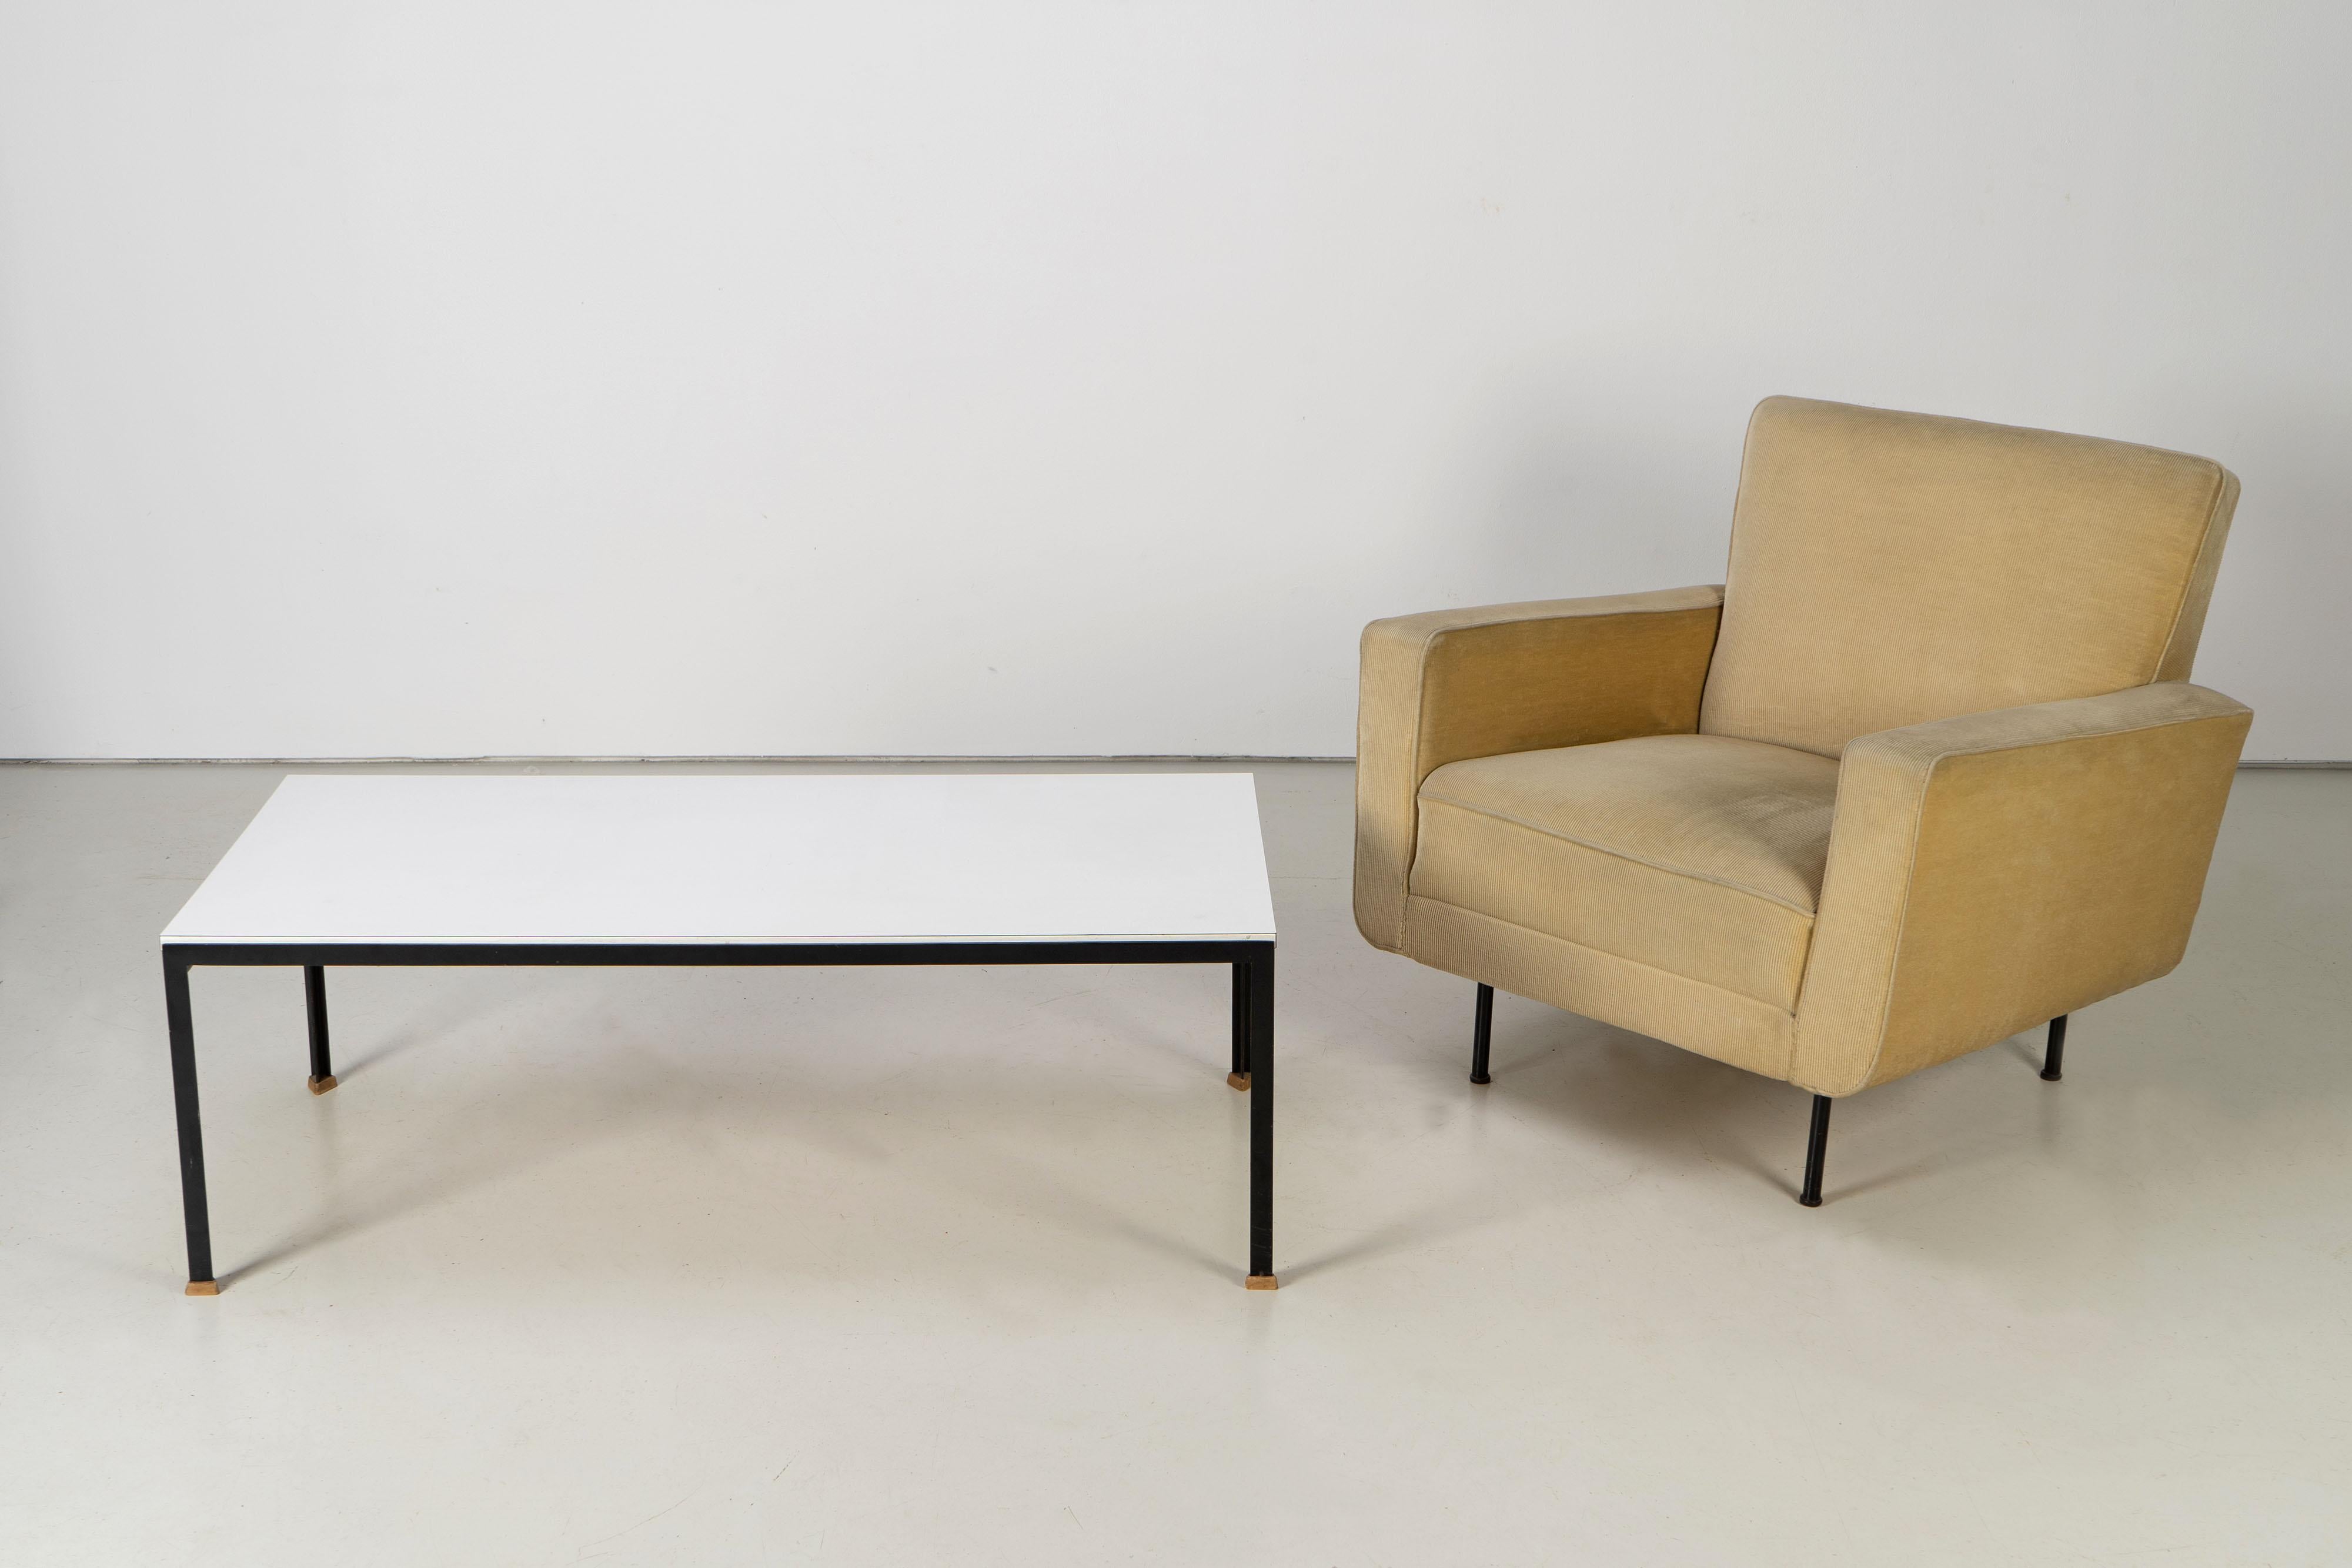 T Angle Coffee Table by Florence Knoll for Knoll International 1950s For Sale 3